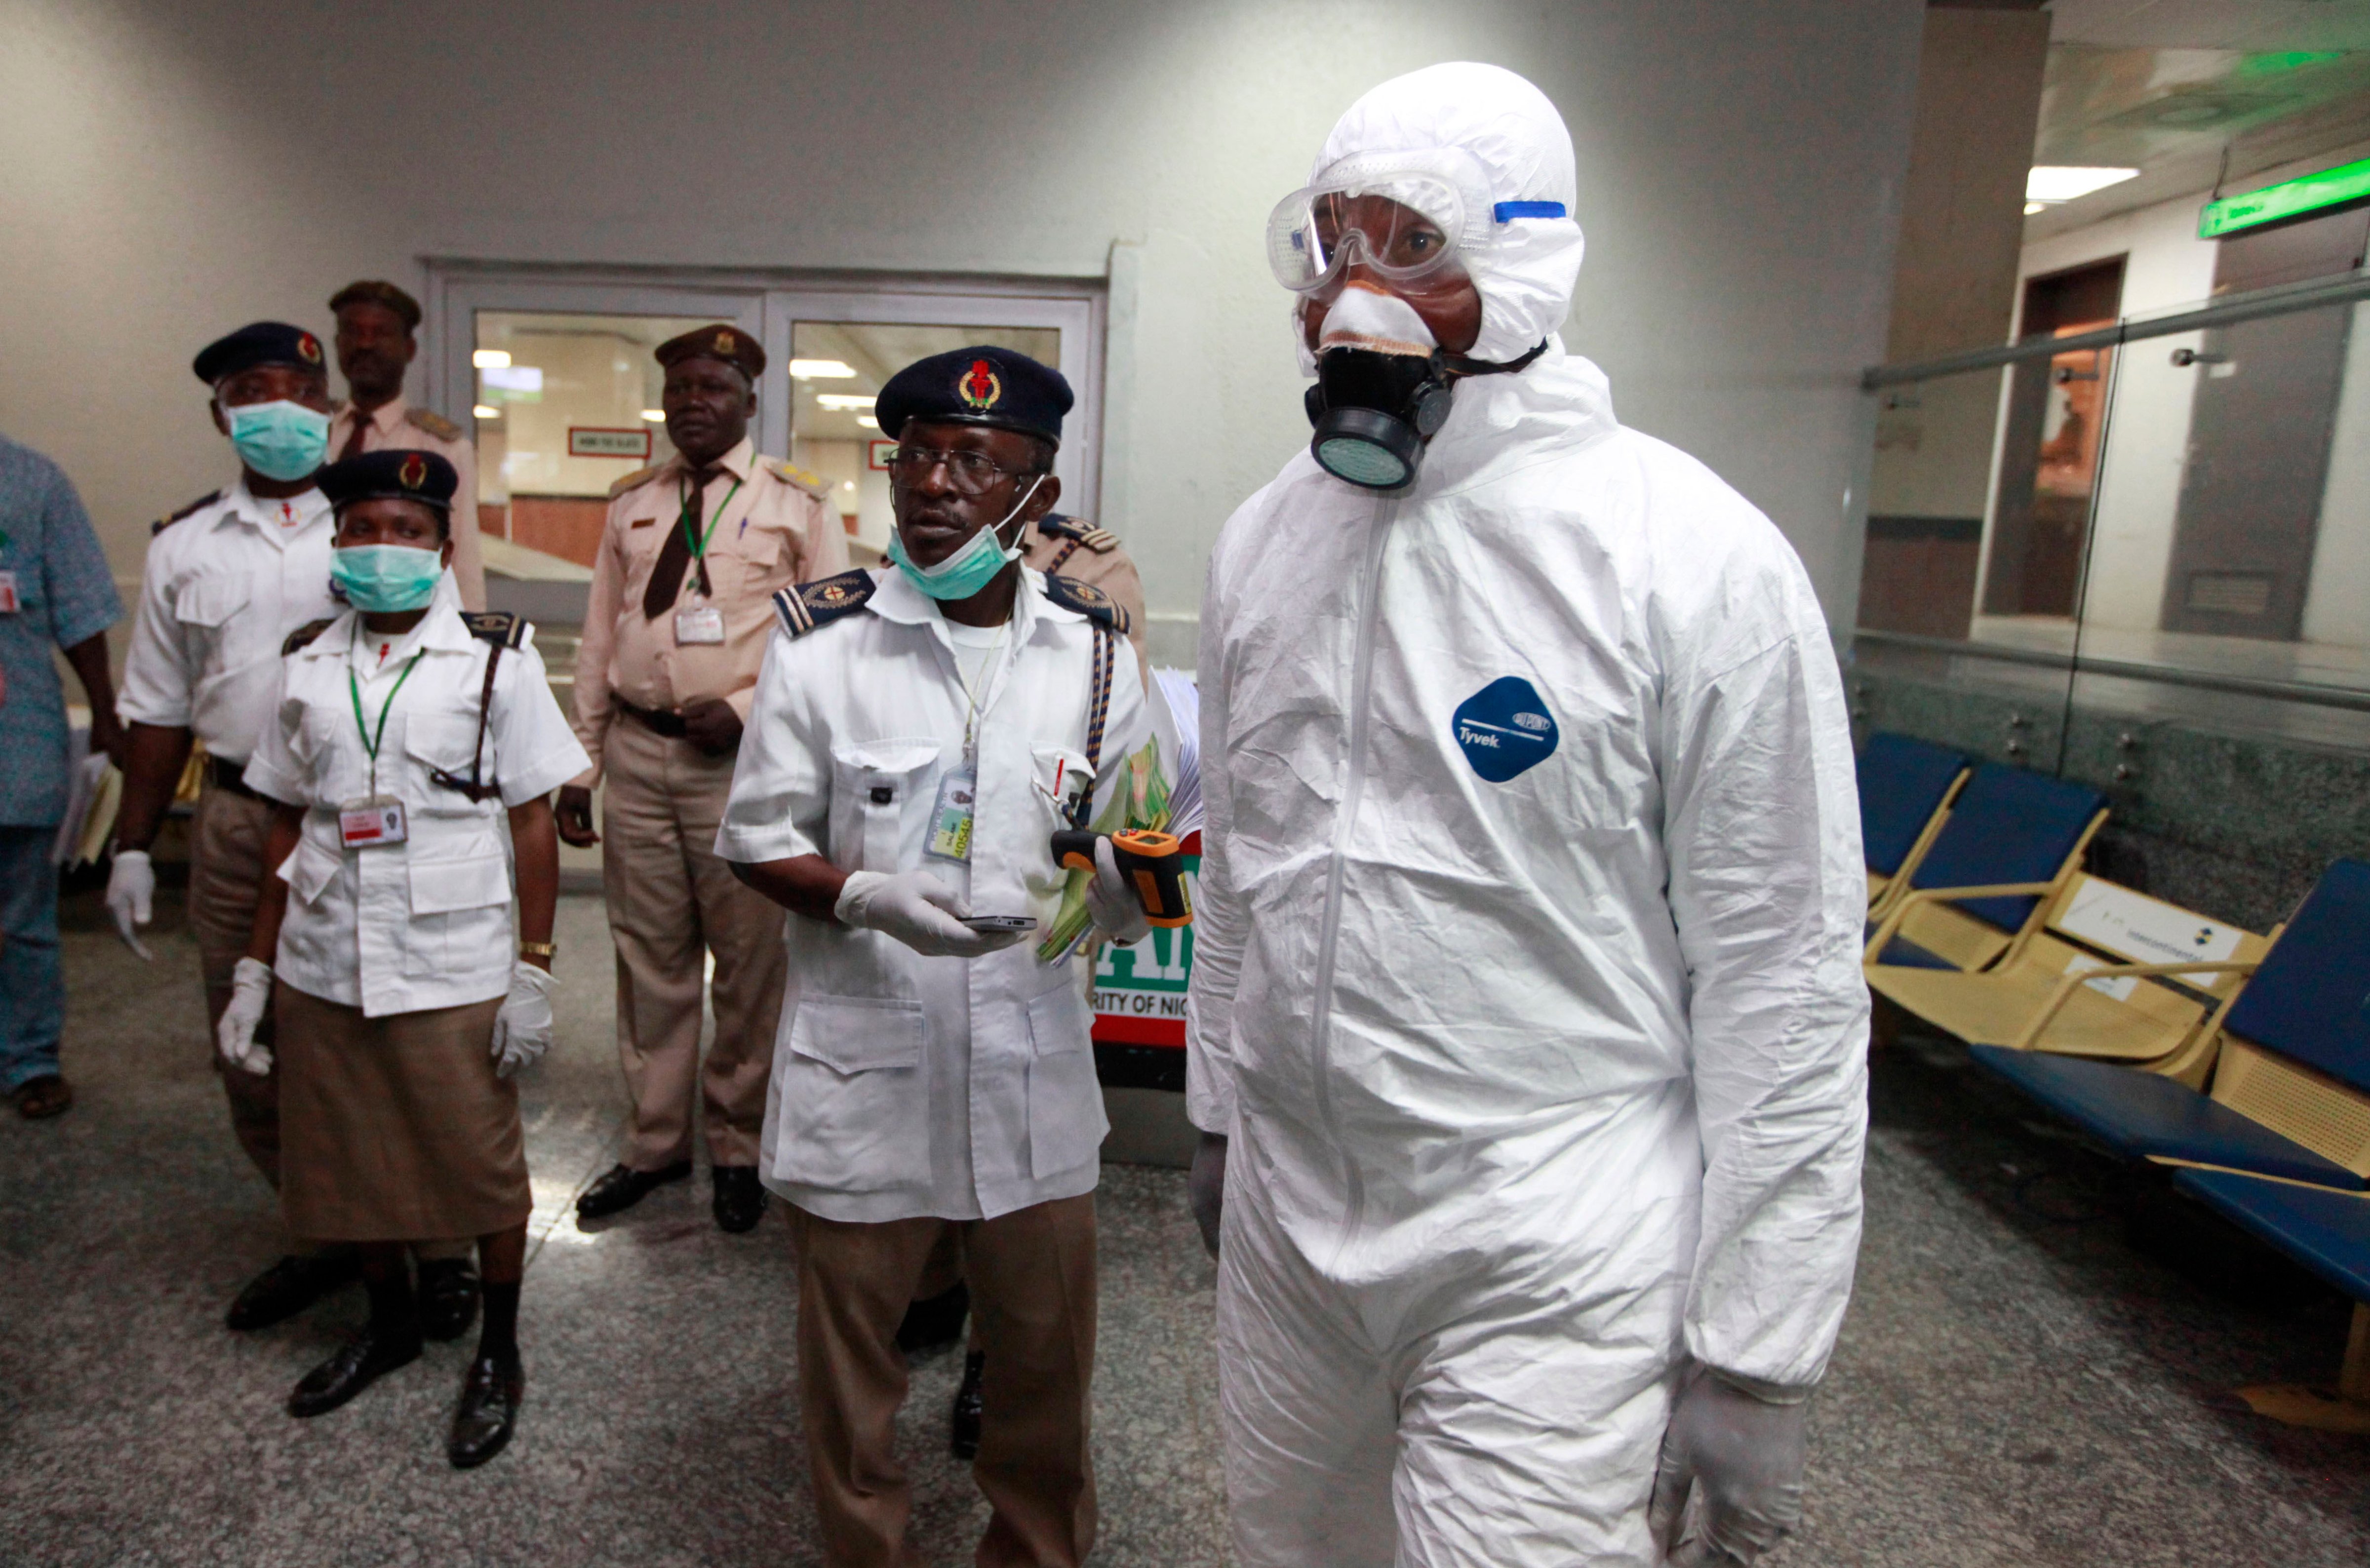 Nigerian health officials wait to screen passengers at the arrival hall of Murtala Muhammed International Airport in Lagos, Nigeria on Aug. 4, 2014. (Sunday Alamba/AP)